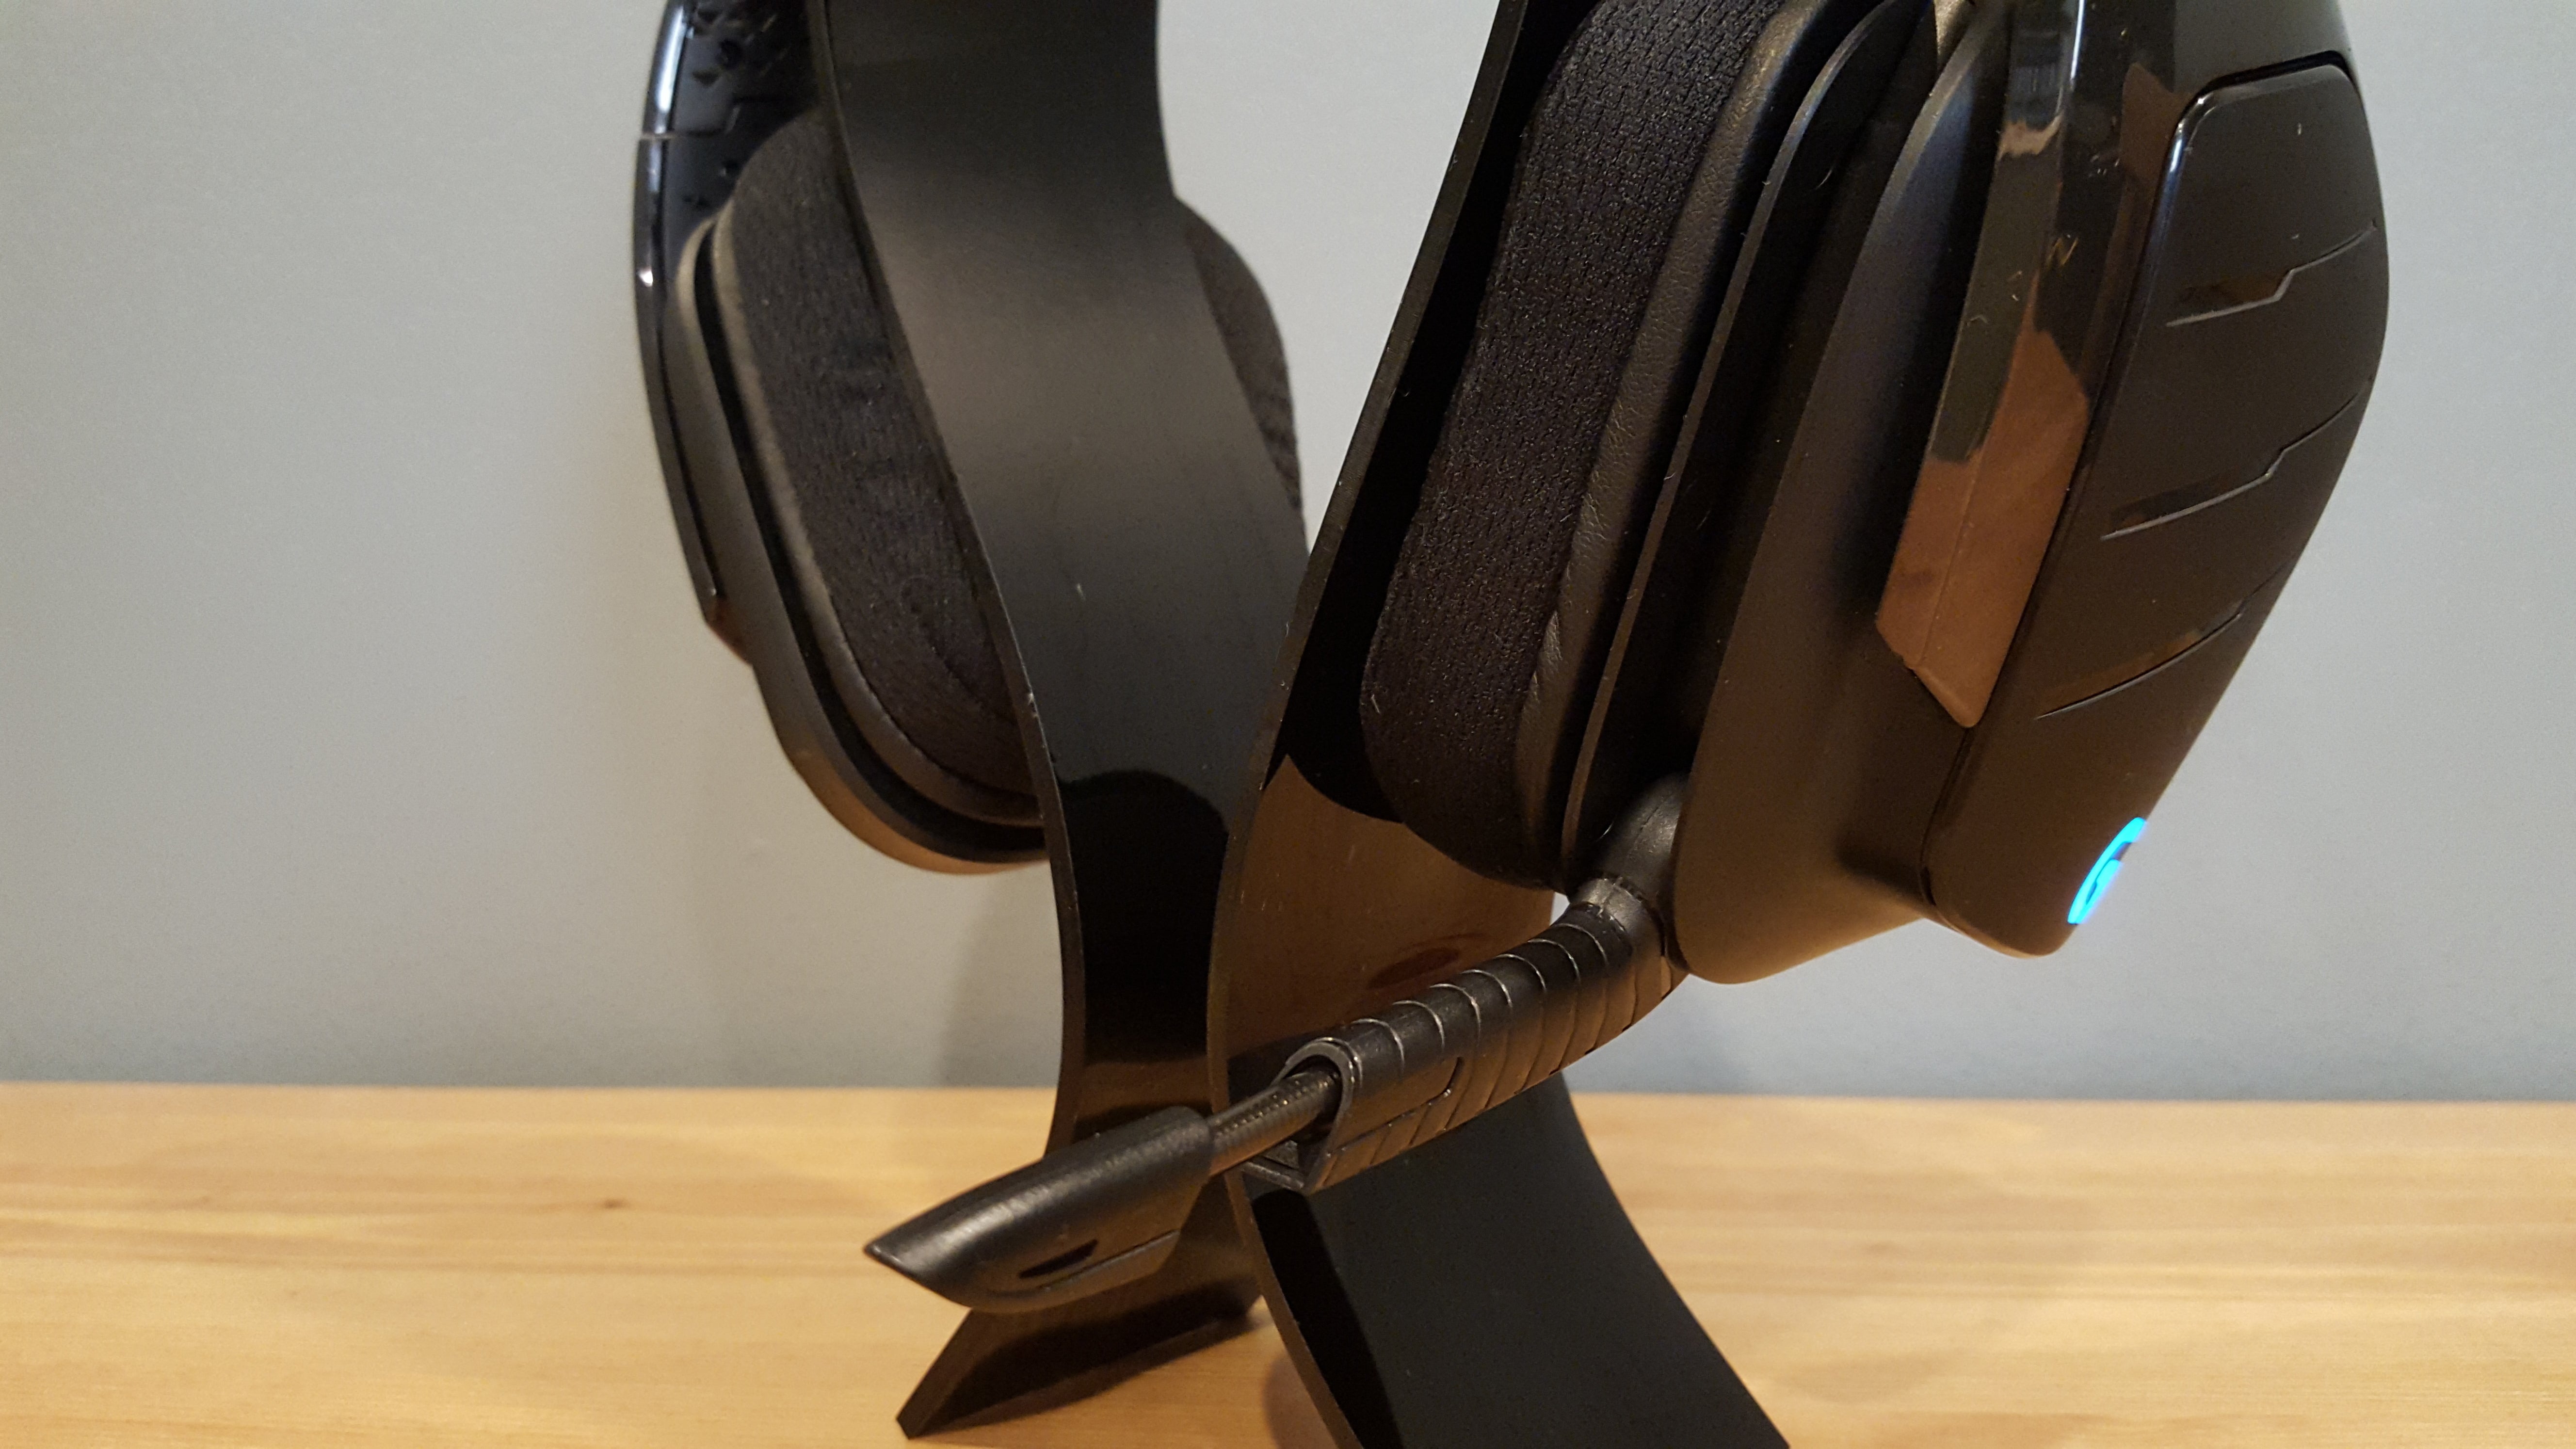 Logitech review: This wireless headset is so good, you can its high-end competition | PCWorld